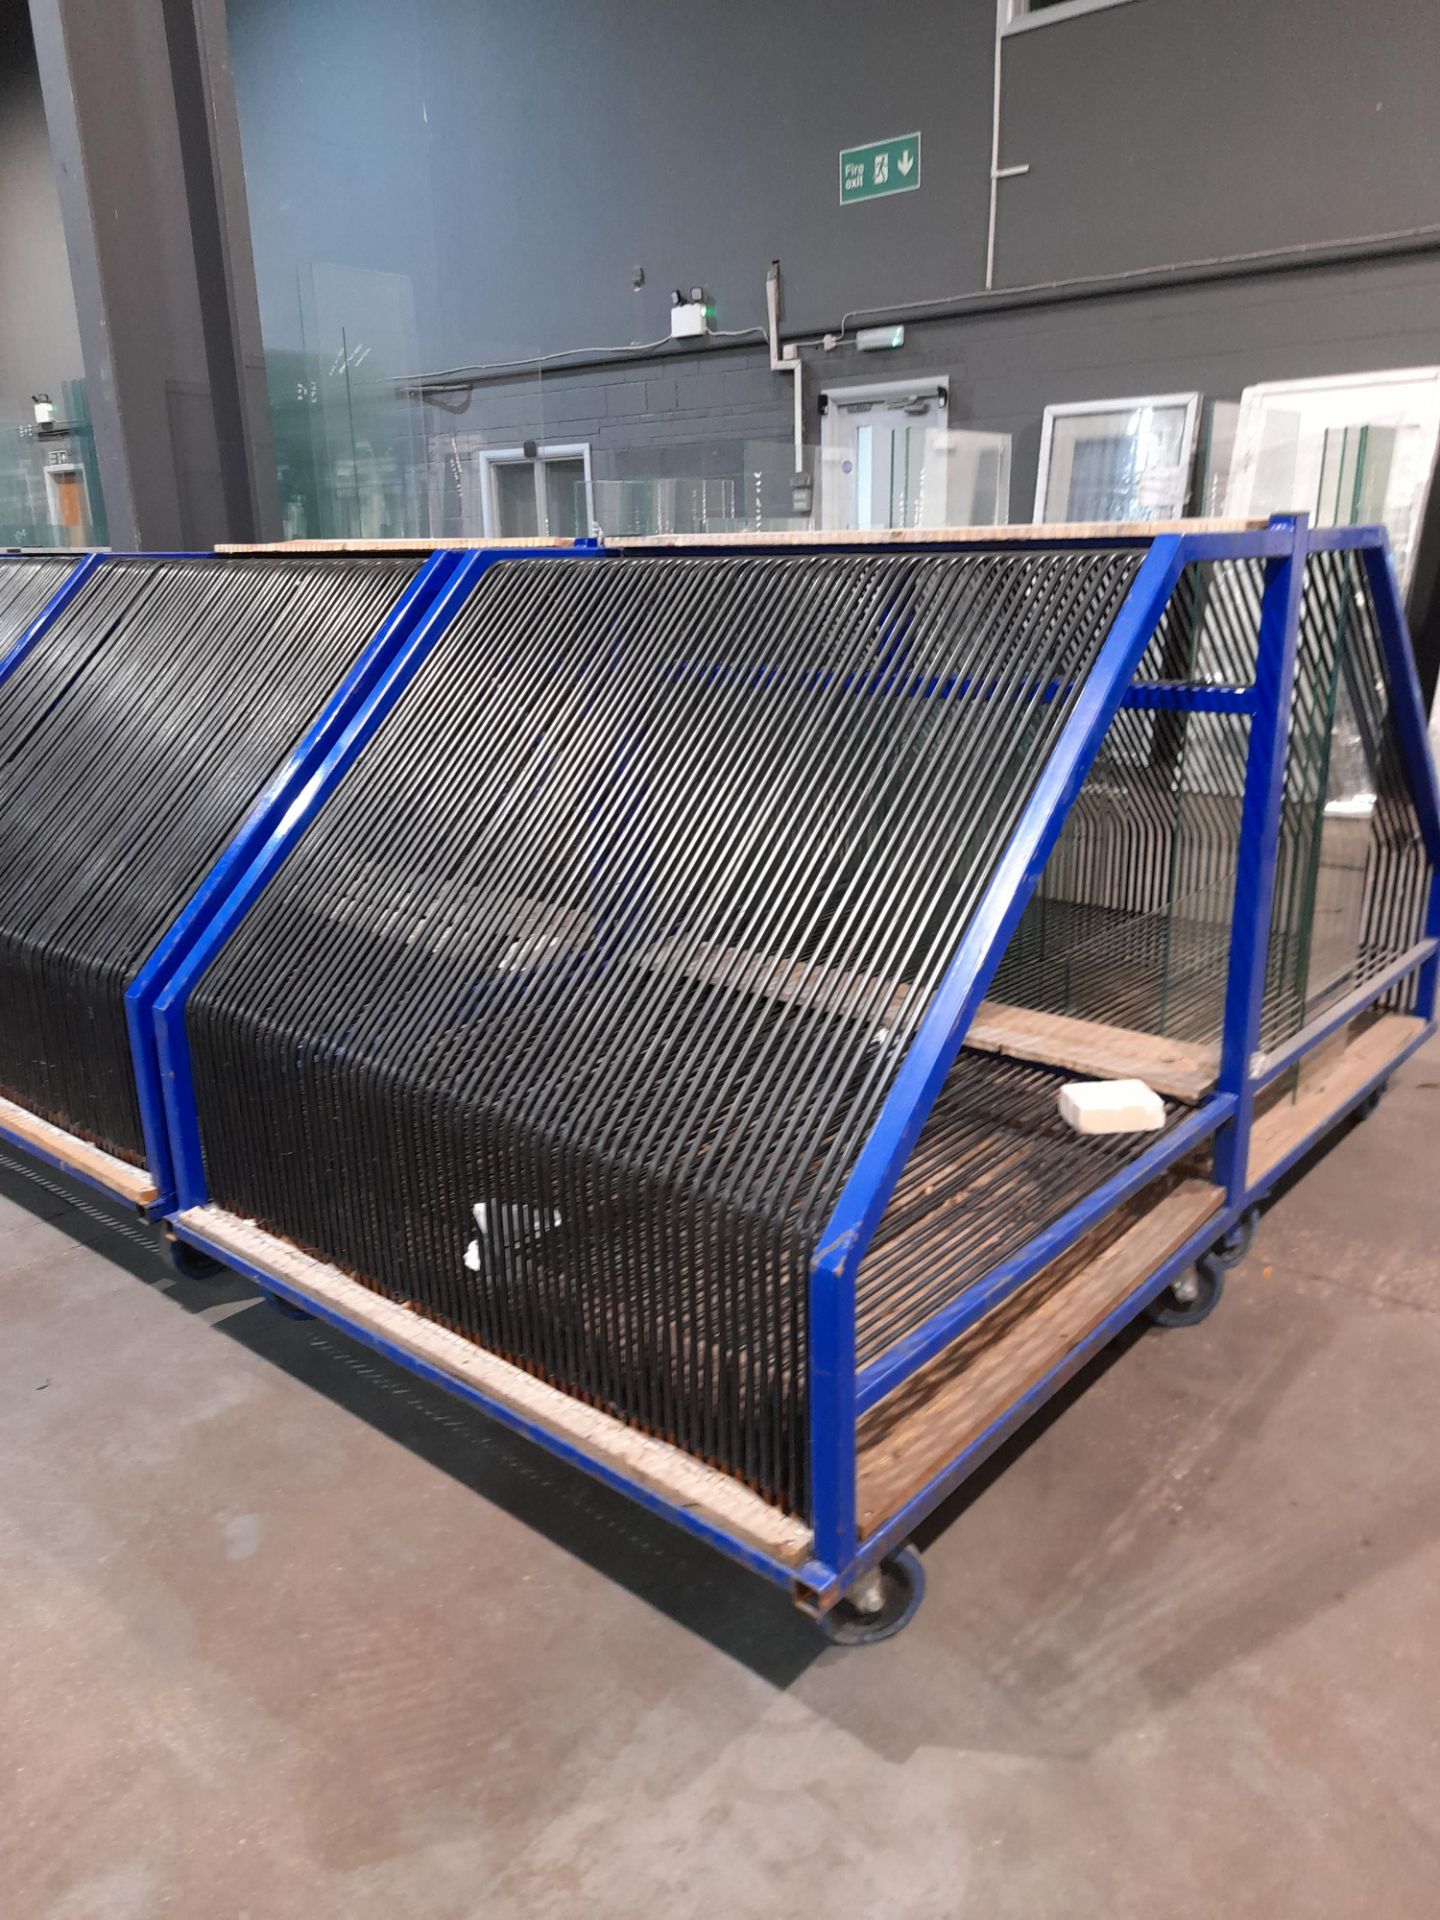 2 x Mobile glass sheet stock trolleys, with contents (Buyer must removal all) - Image 2 of 2